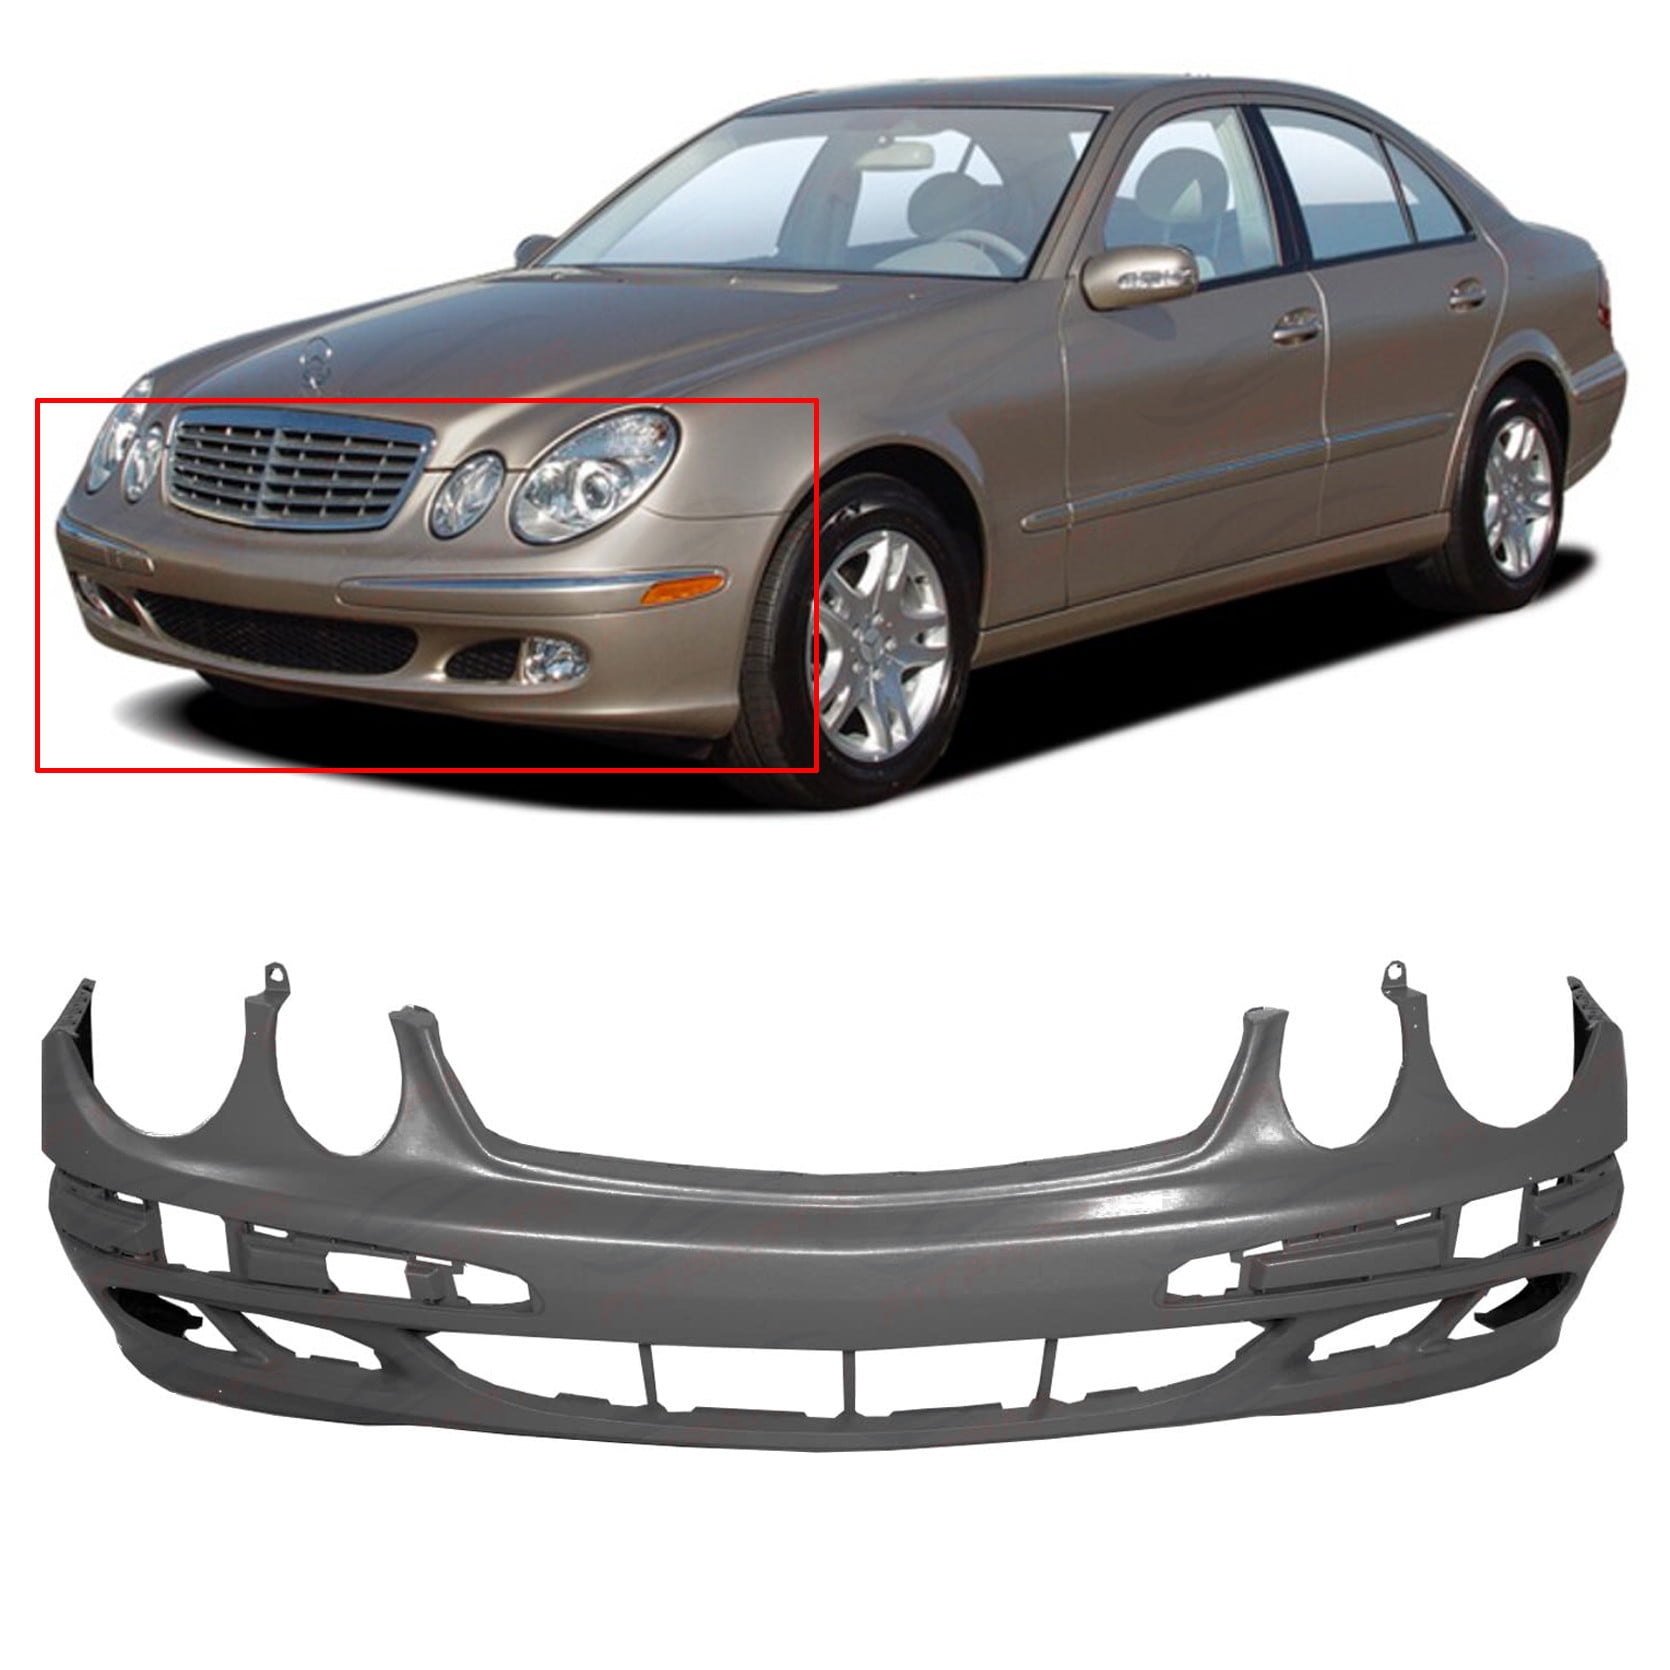 BUMPERS THAT DELIVER Primered NI1000234 Front Bumper Cover Fascia for 2006-2009 Nissan 350Z Coupe/Convertible 06-09 